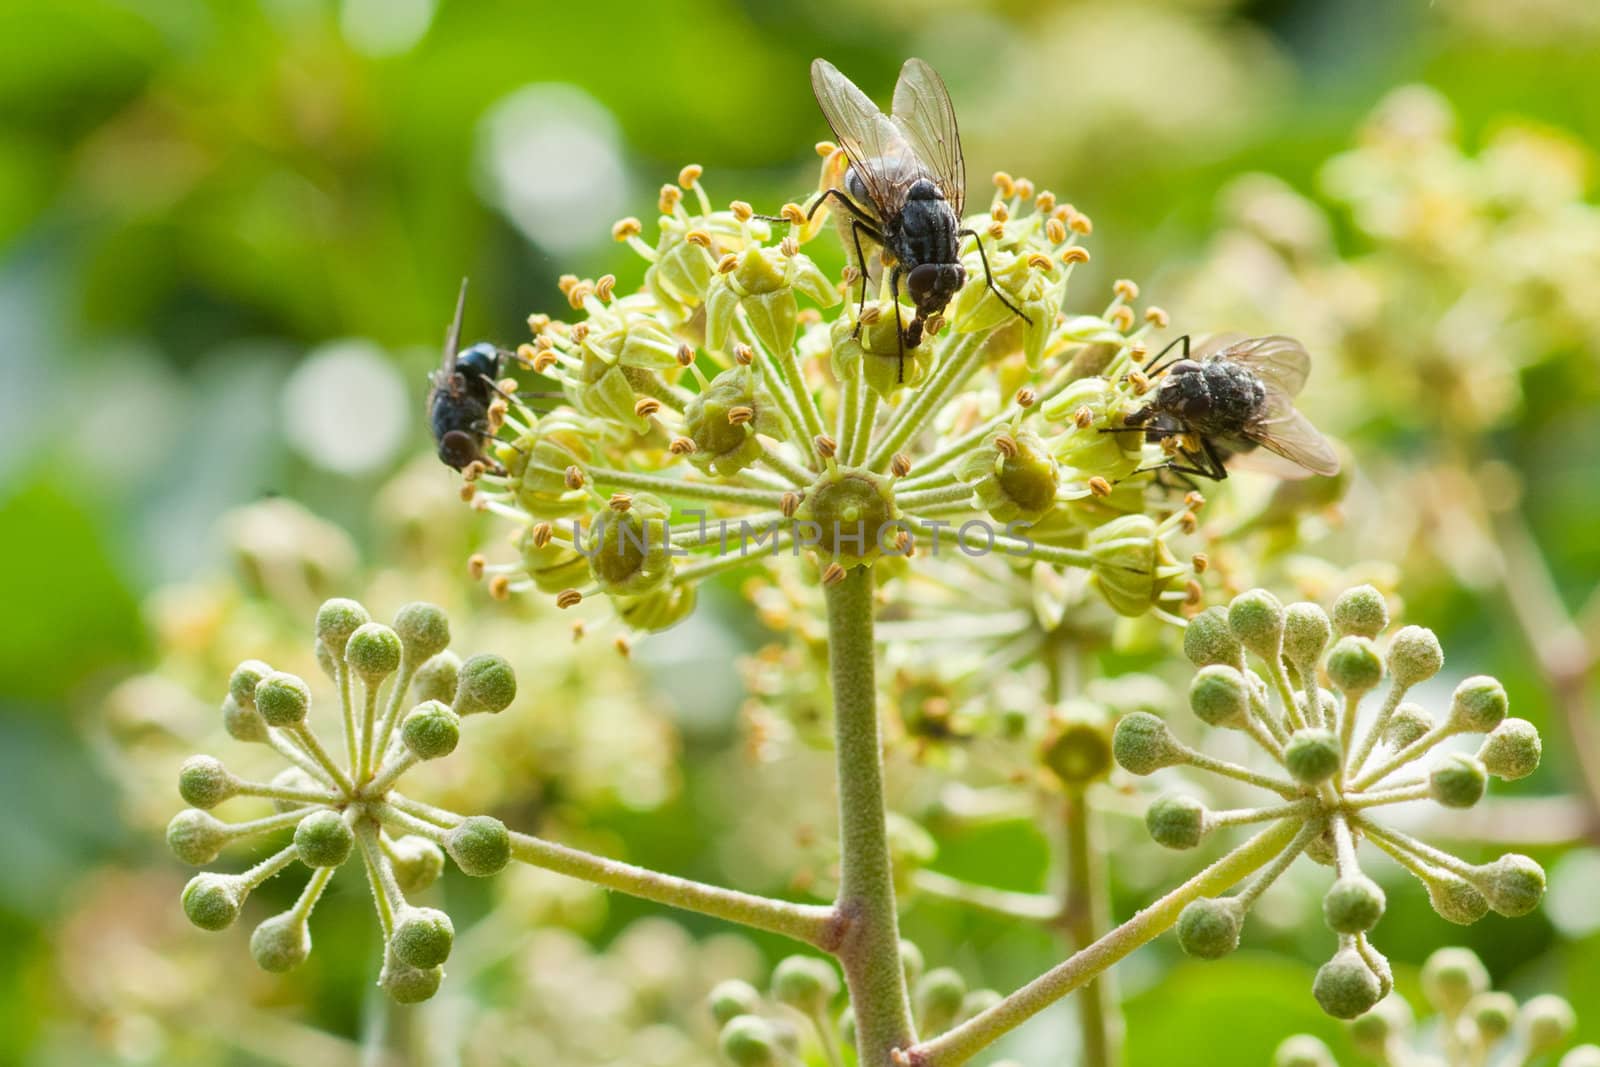 Flies on Common Ivy Flowers by PiLens